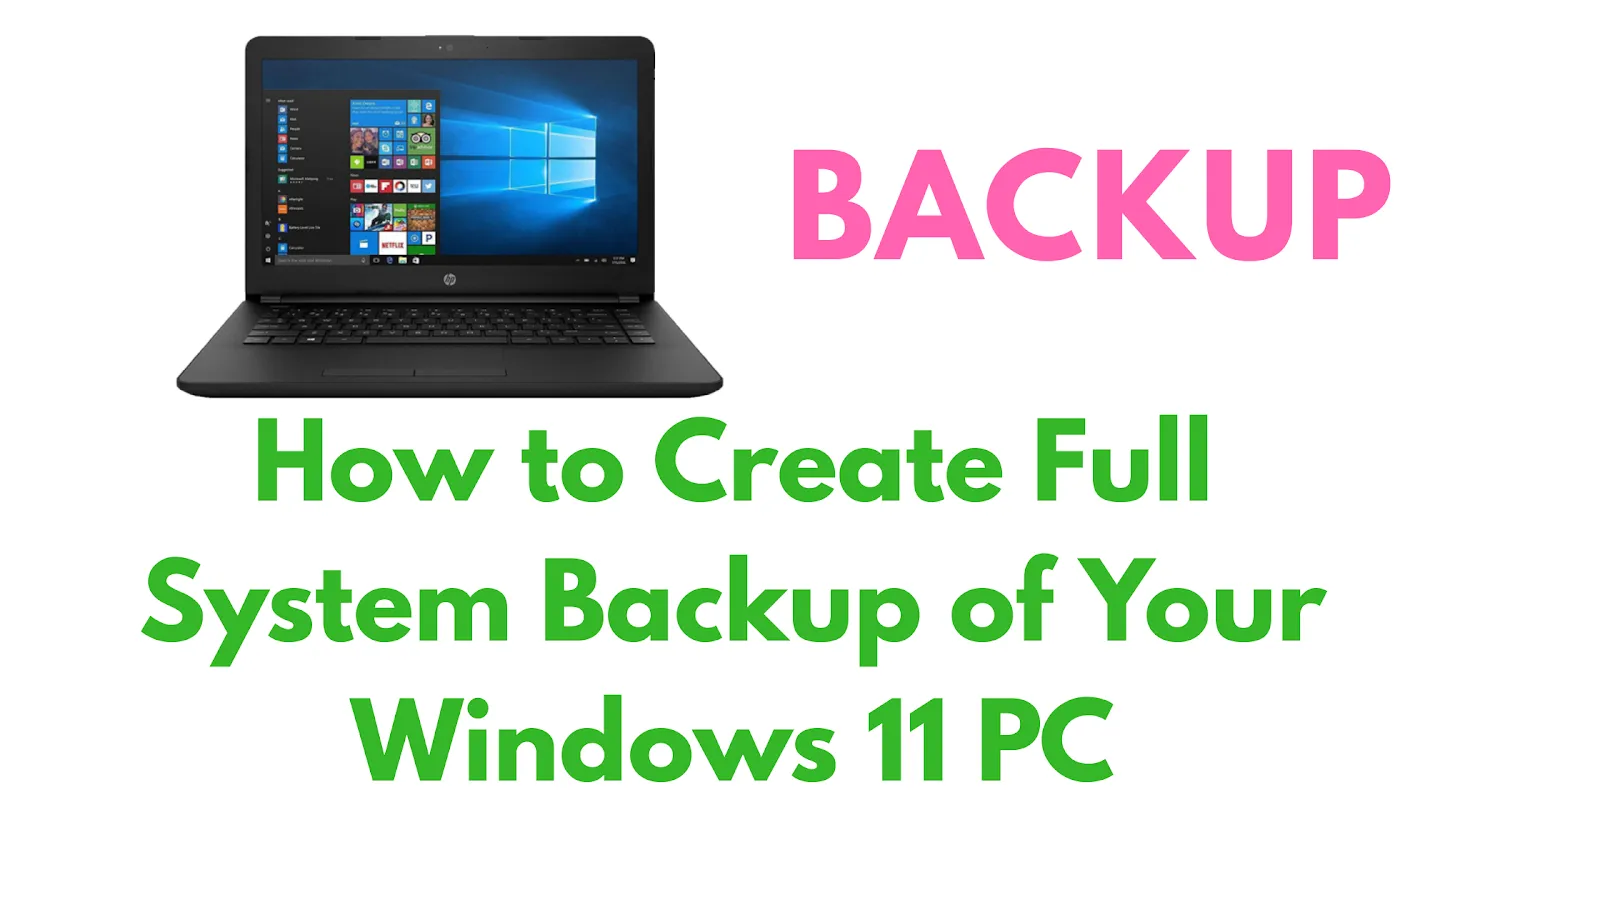 How to Create Full System Backup of Your Windows 11 PC